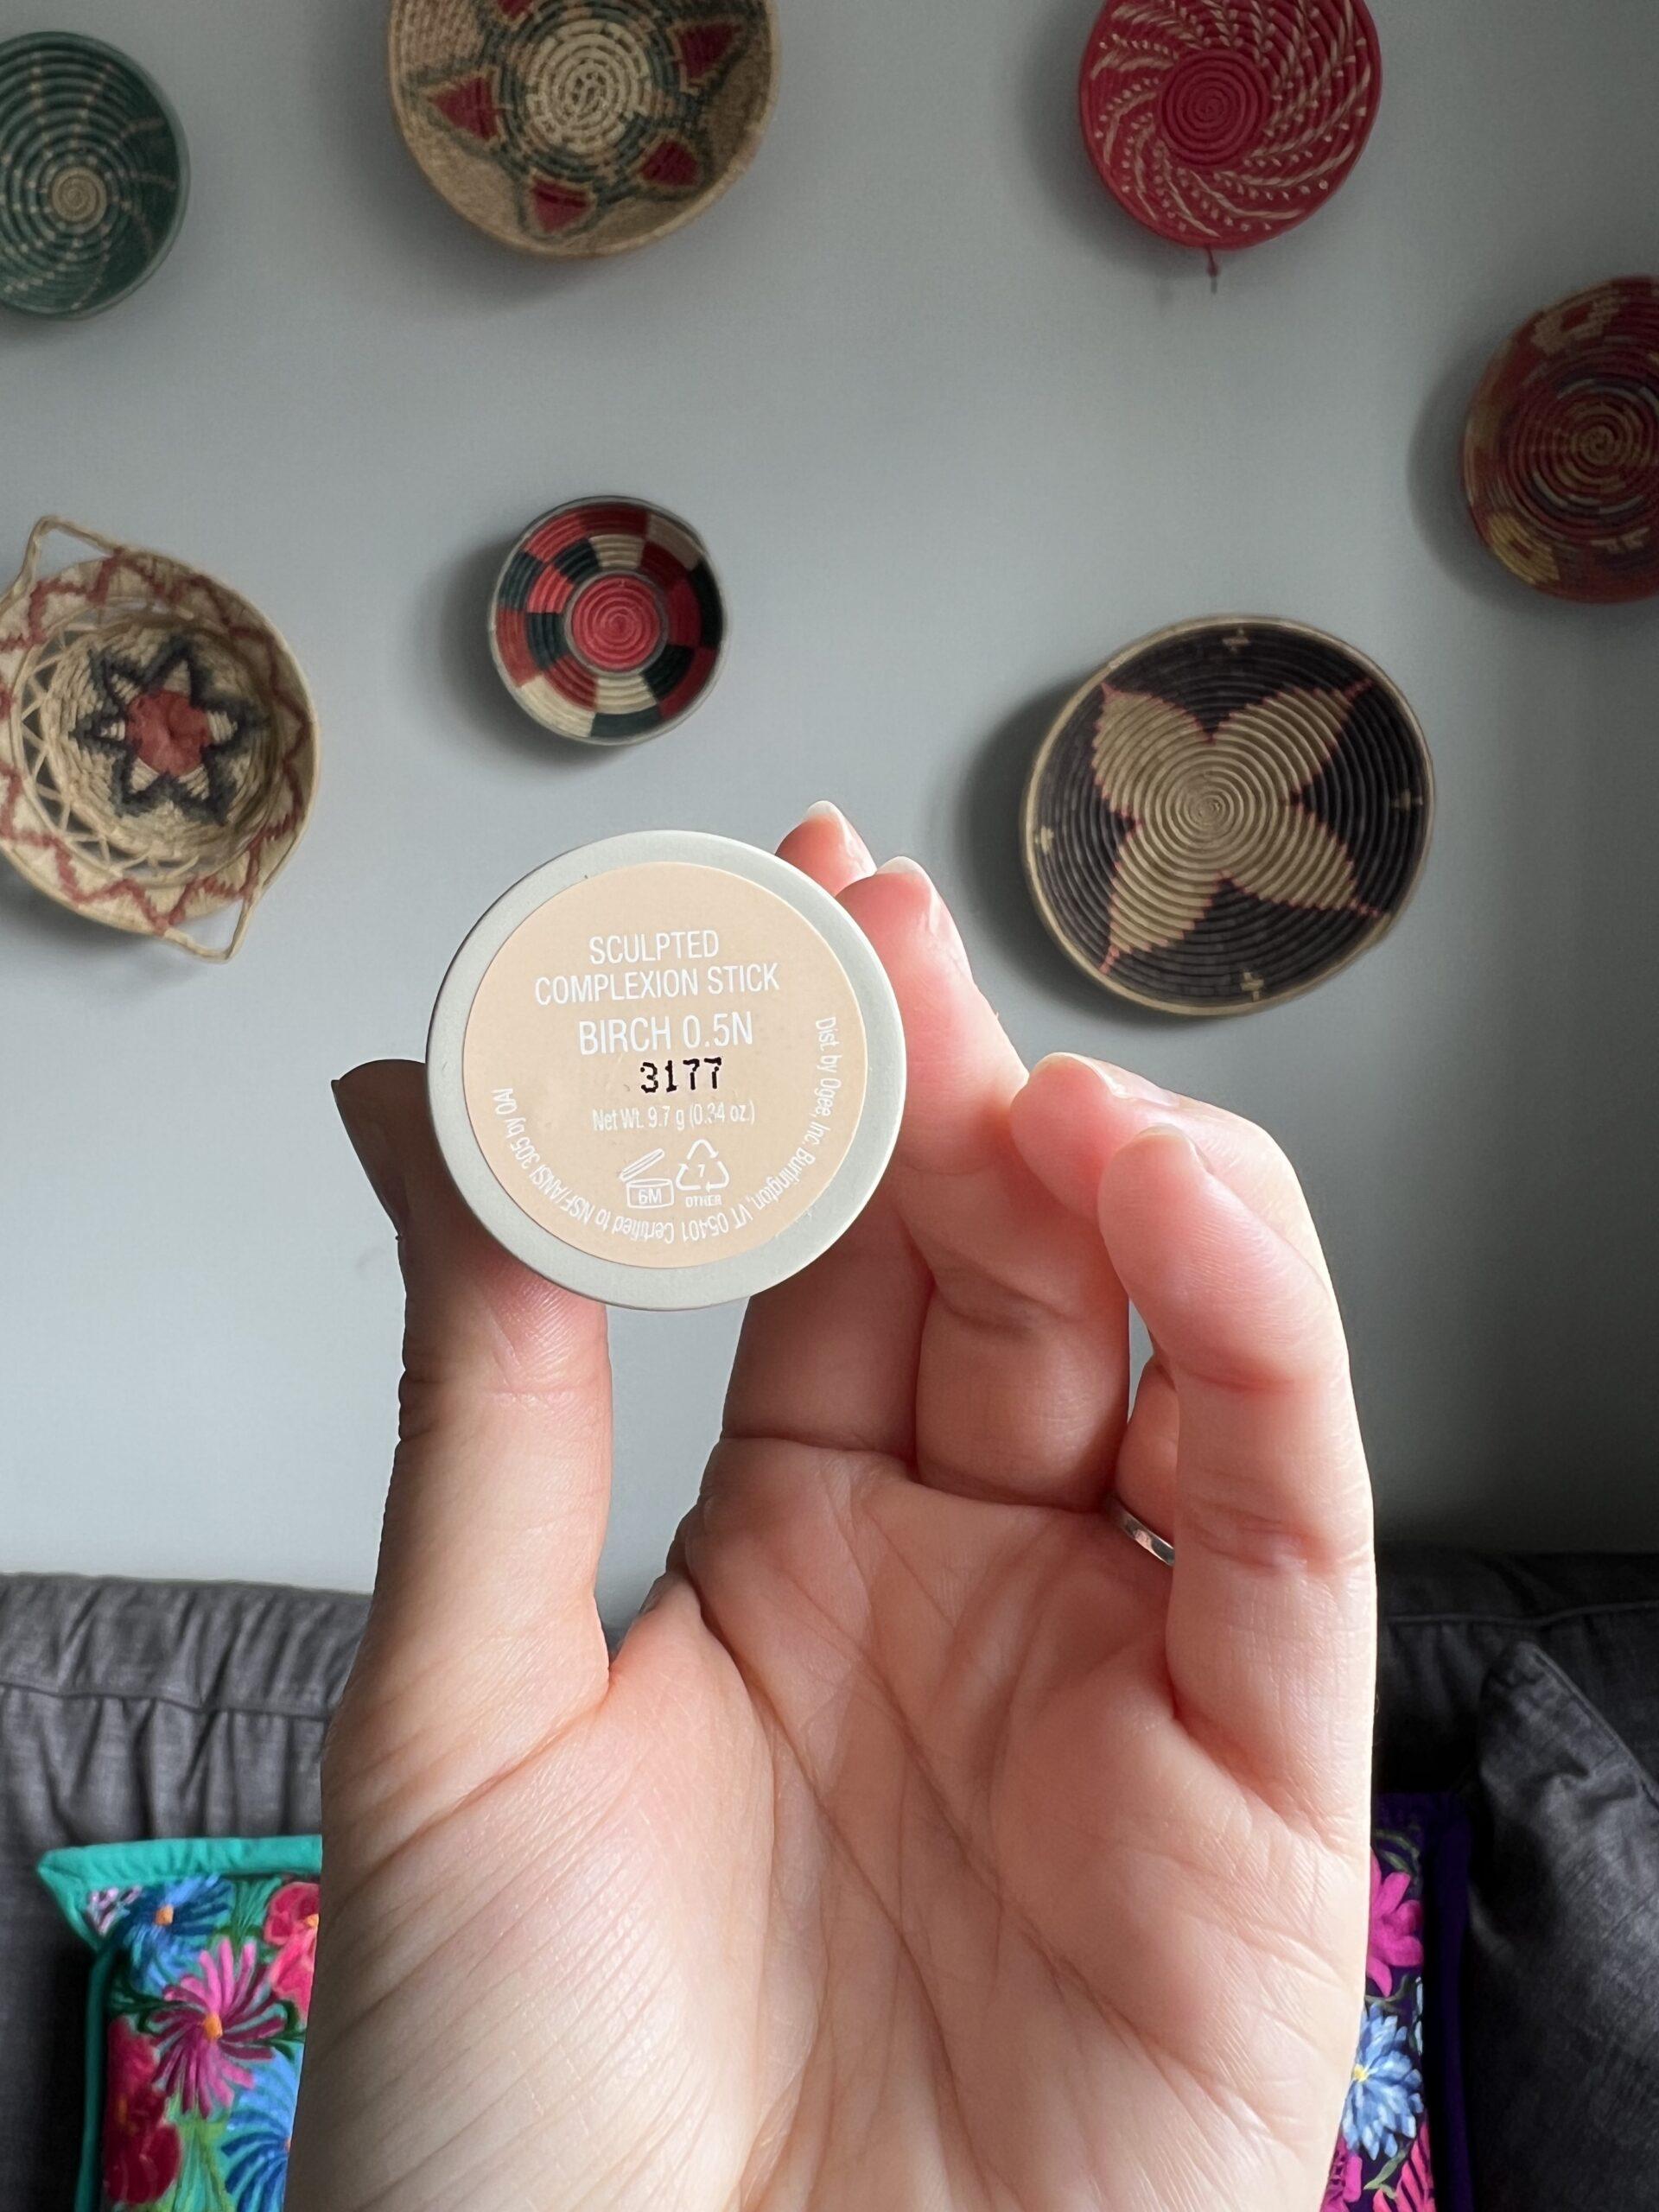 My Honest Ogee Makeup Review - The Daley Dose